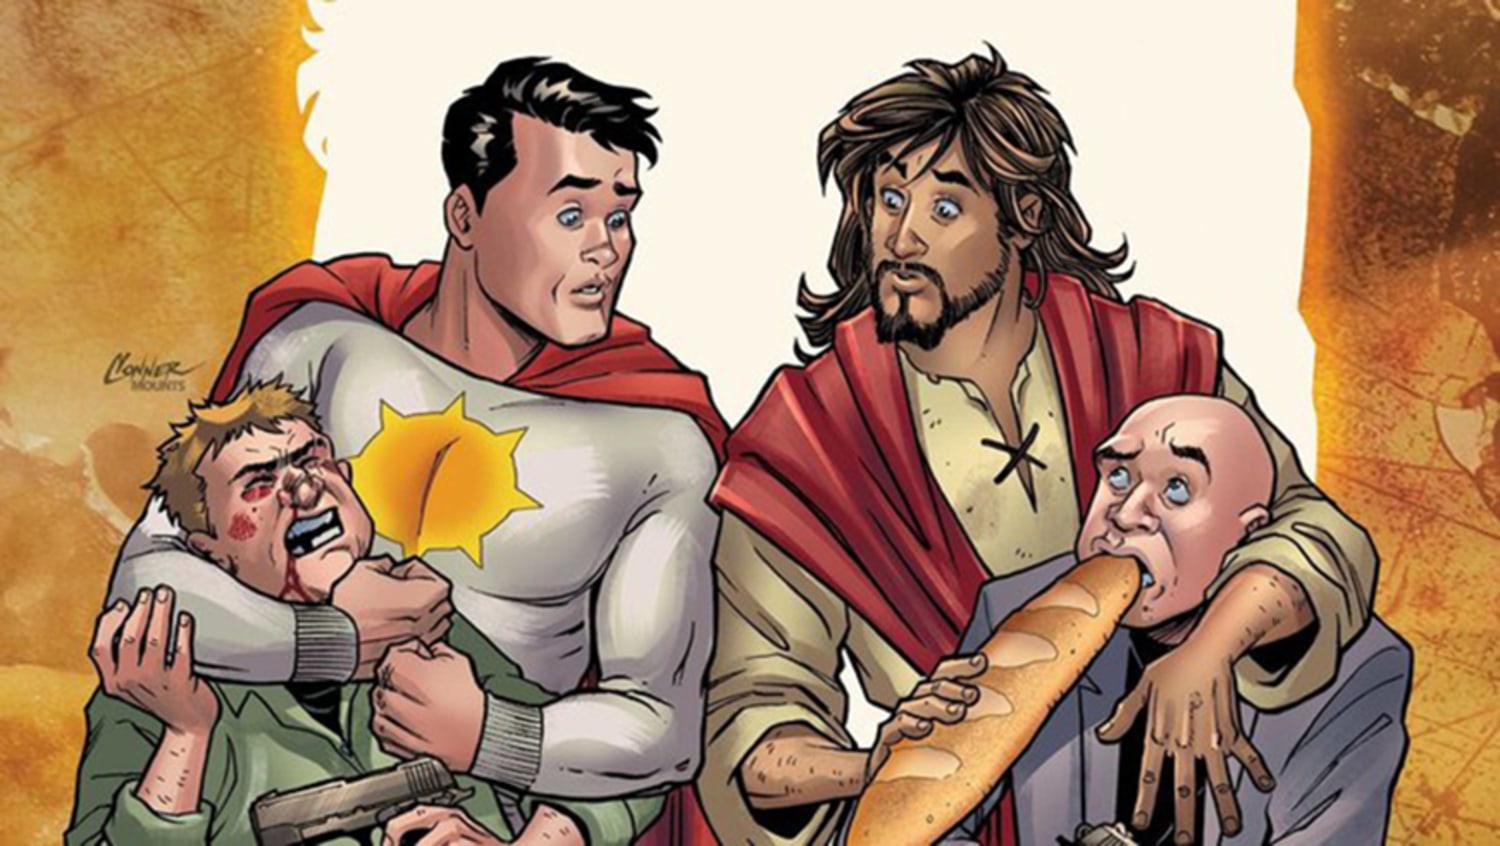 DC cancels comic book about a second coming of Christ amid backlash